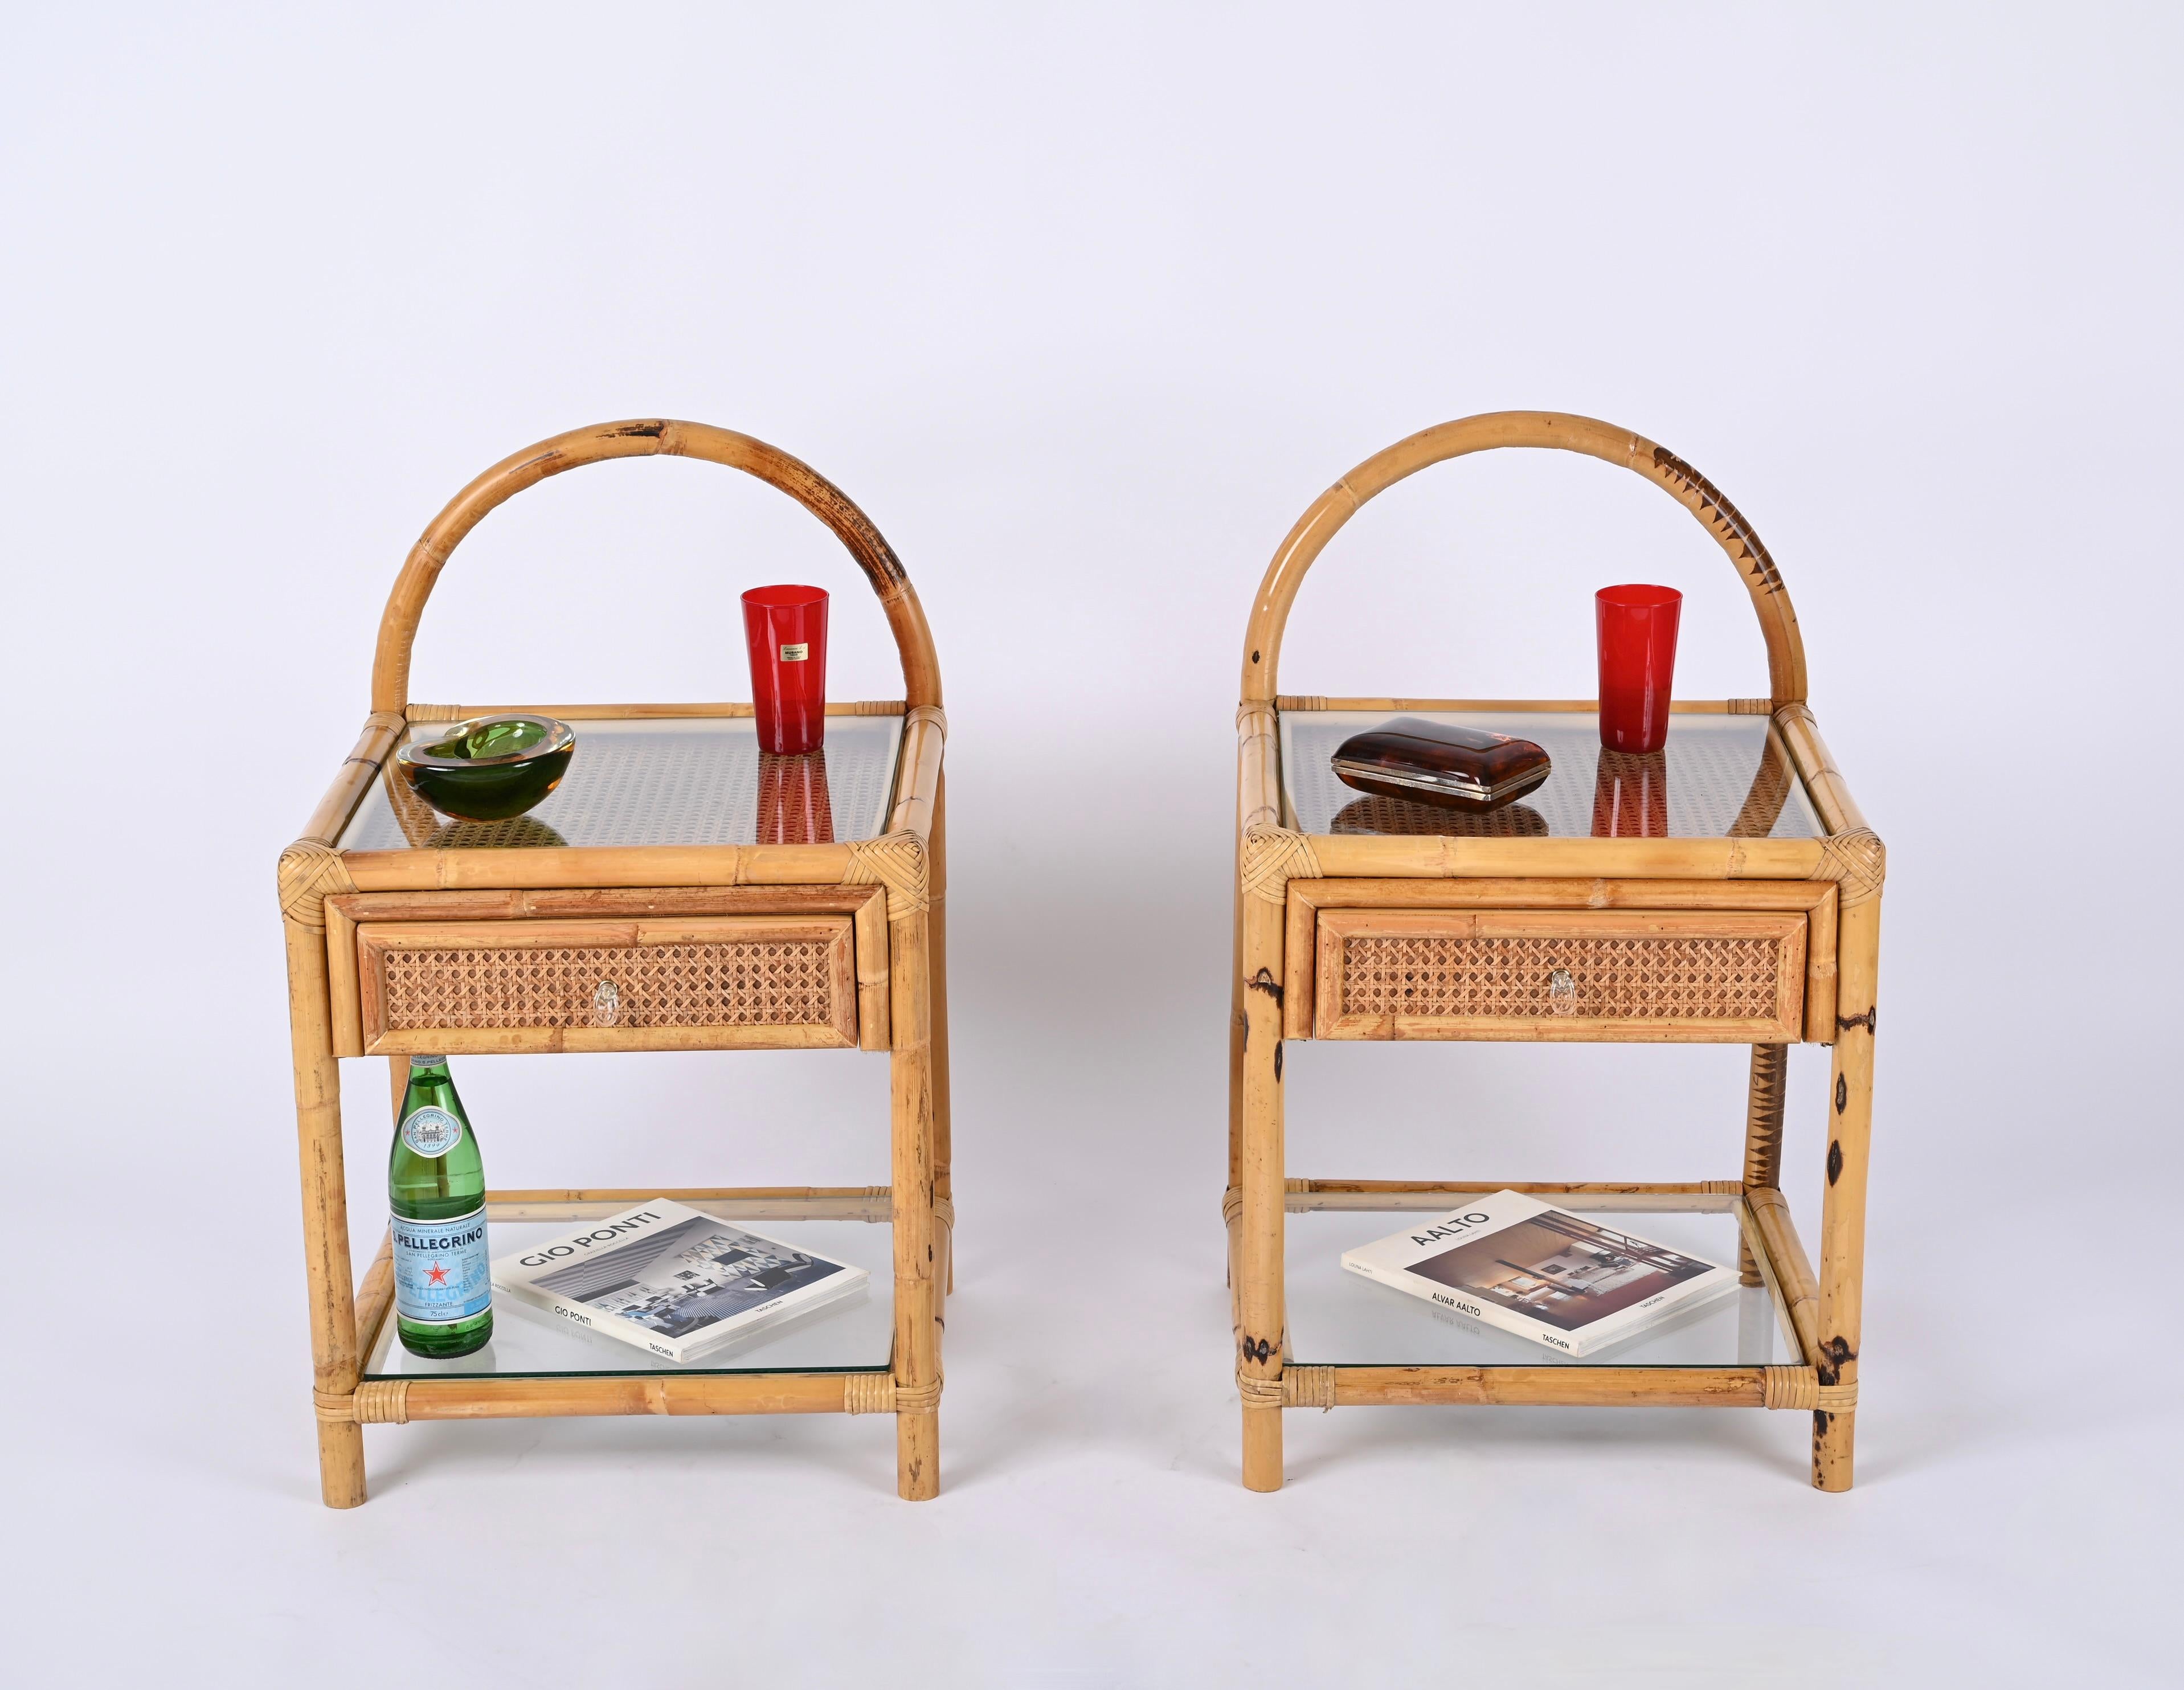 Fantastic pair of Mid-Century nightstands in bamboo, Vienna straw, hand-woven rattan wicker and clear glass. These lovely French Riviera style bedside tables were designed in Italy during the 1970s.

These charming organic nightstands are fully made